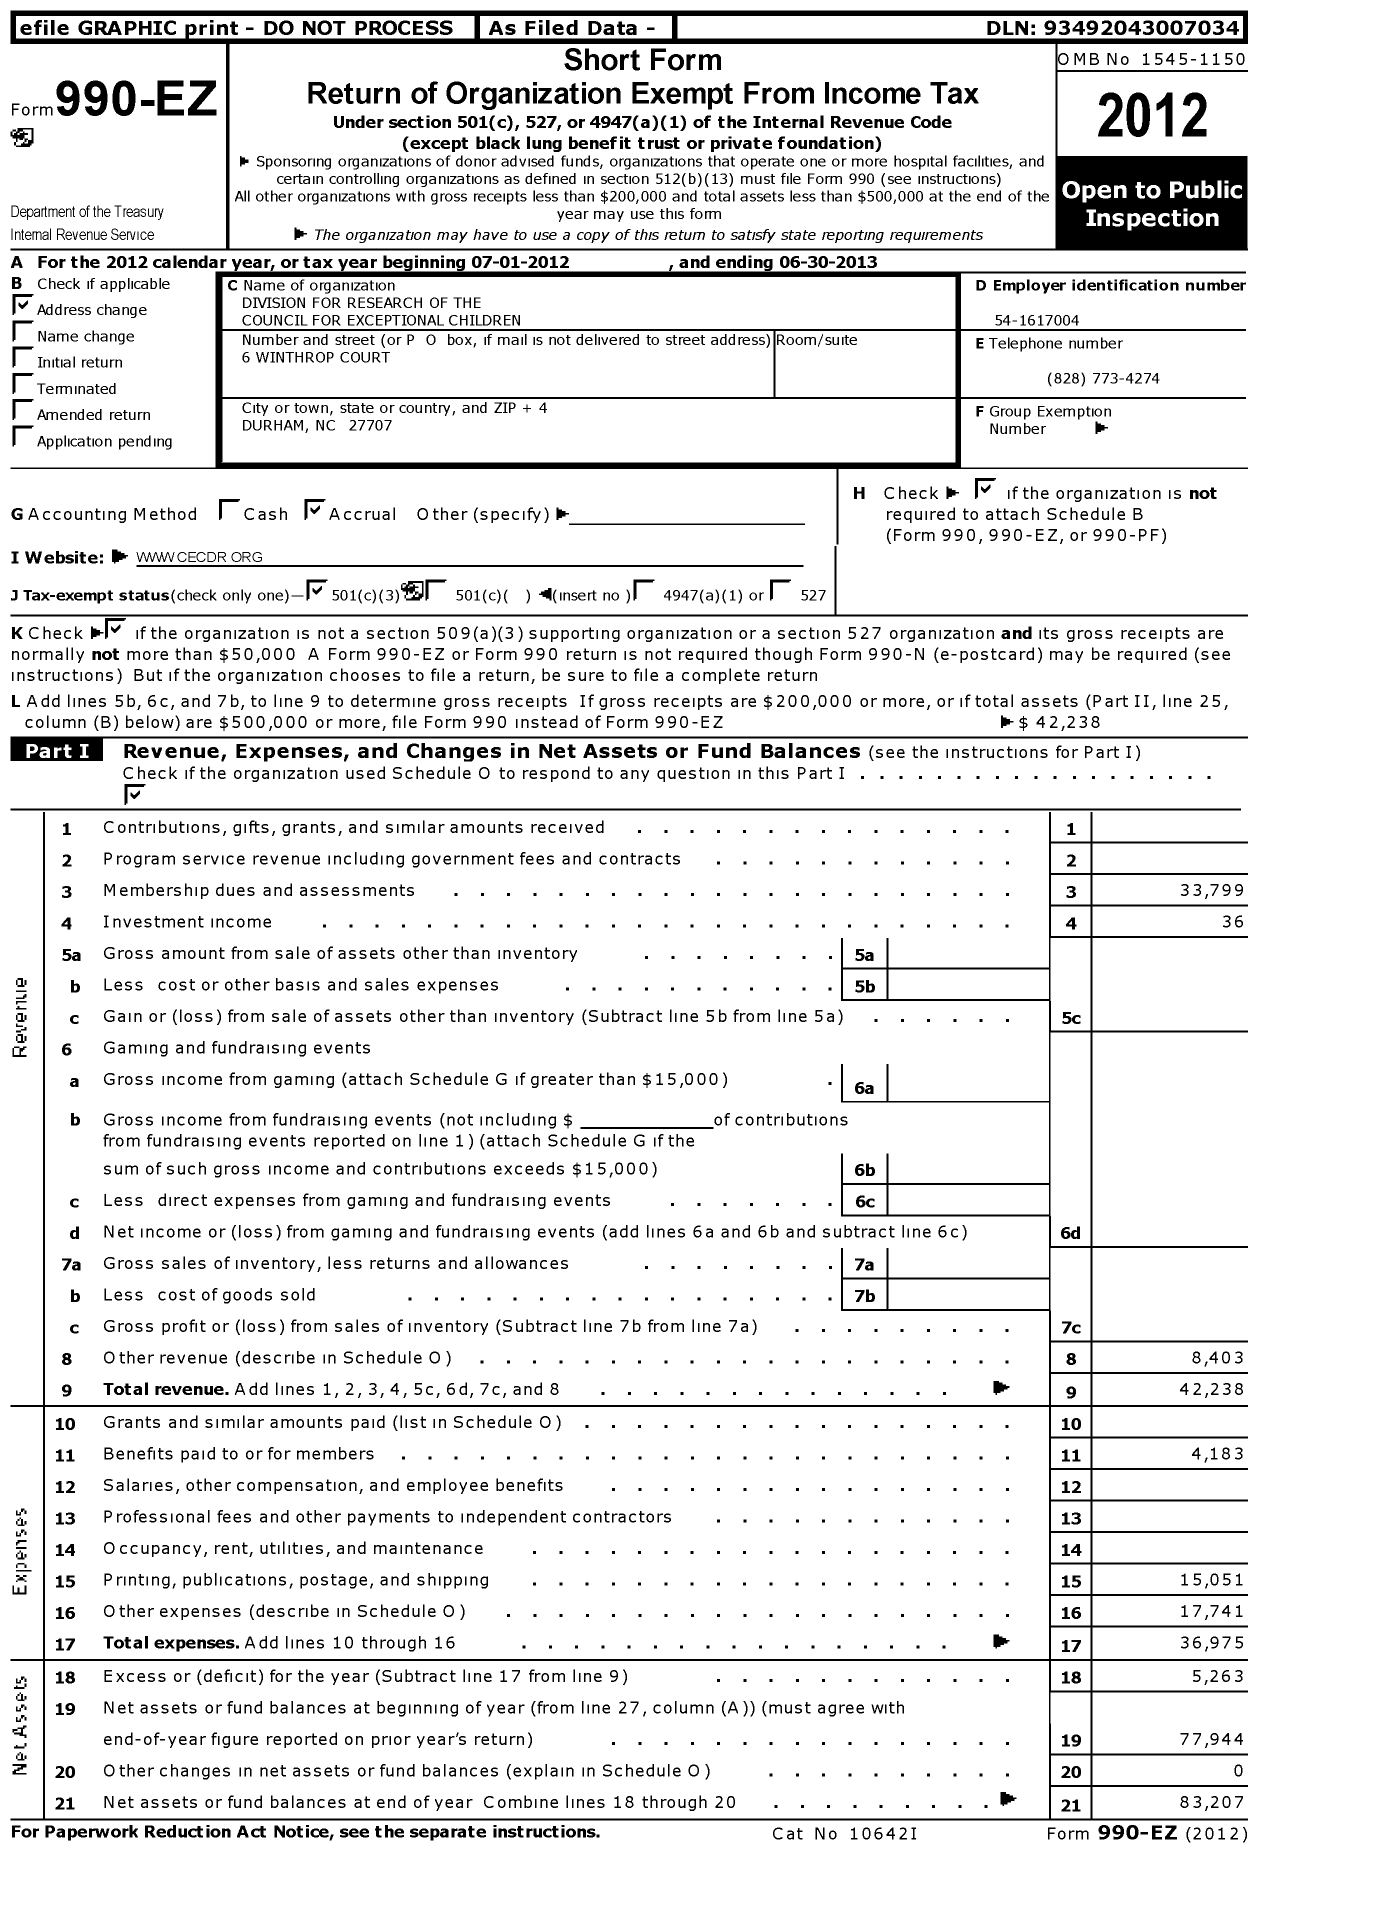 Image of first page of 2012 Form 990EZ for Division for the Research of the Council for Exceptional Children